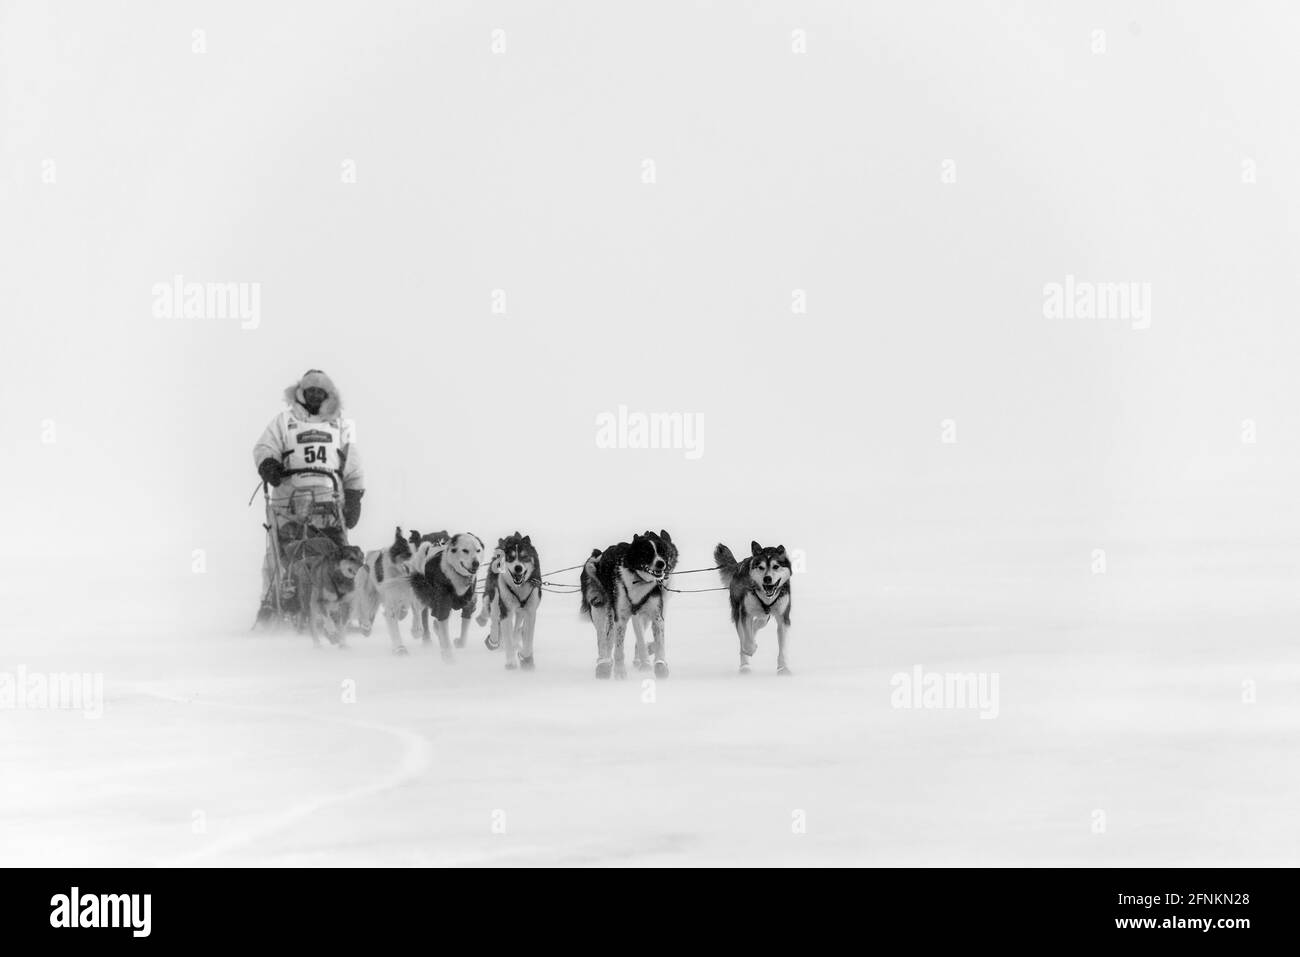 A competitor heads into Nome in near whiteout conditions in the Iditarod dog sled race.  Nome, Alaska. Stock Photo